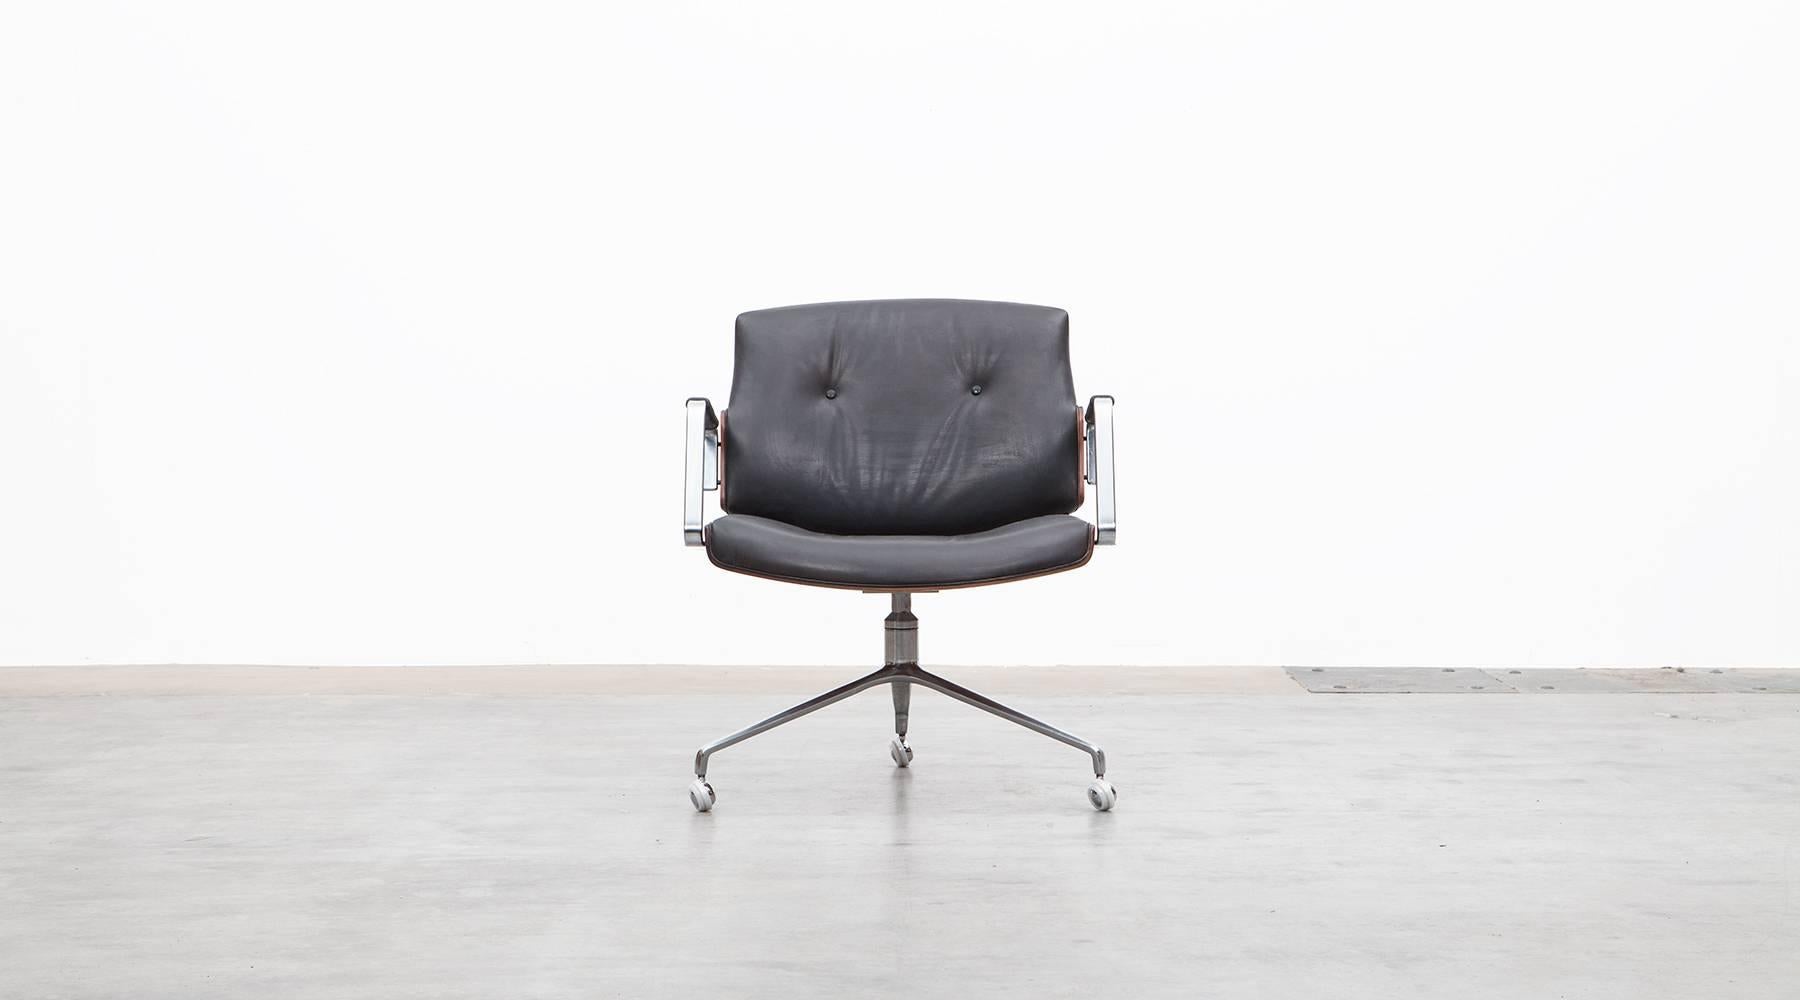 Classical swivel chairs designed by Preben Fabricius and Jørgen Kastholm. The chair has a brushed steel tripod foot, high quality leather upholstery and two curved wooden shells in rosewood. This model has slight signs of wear at the edges and light